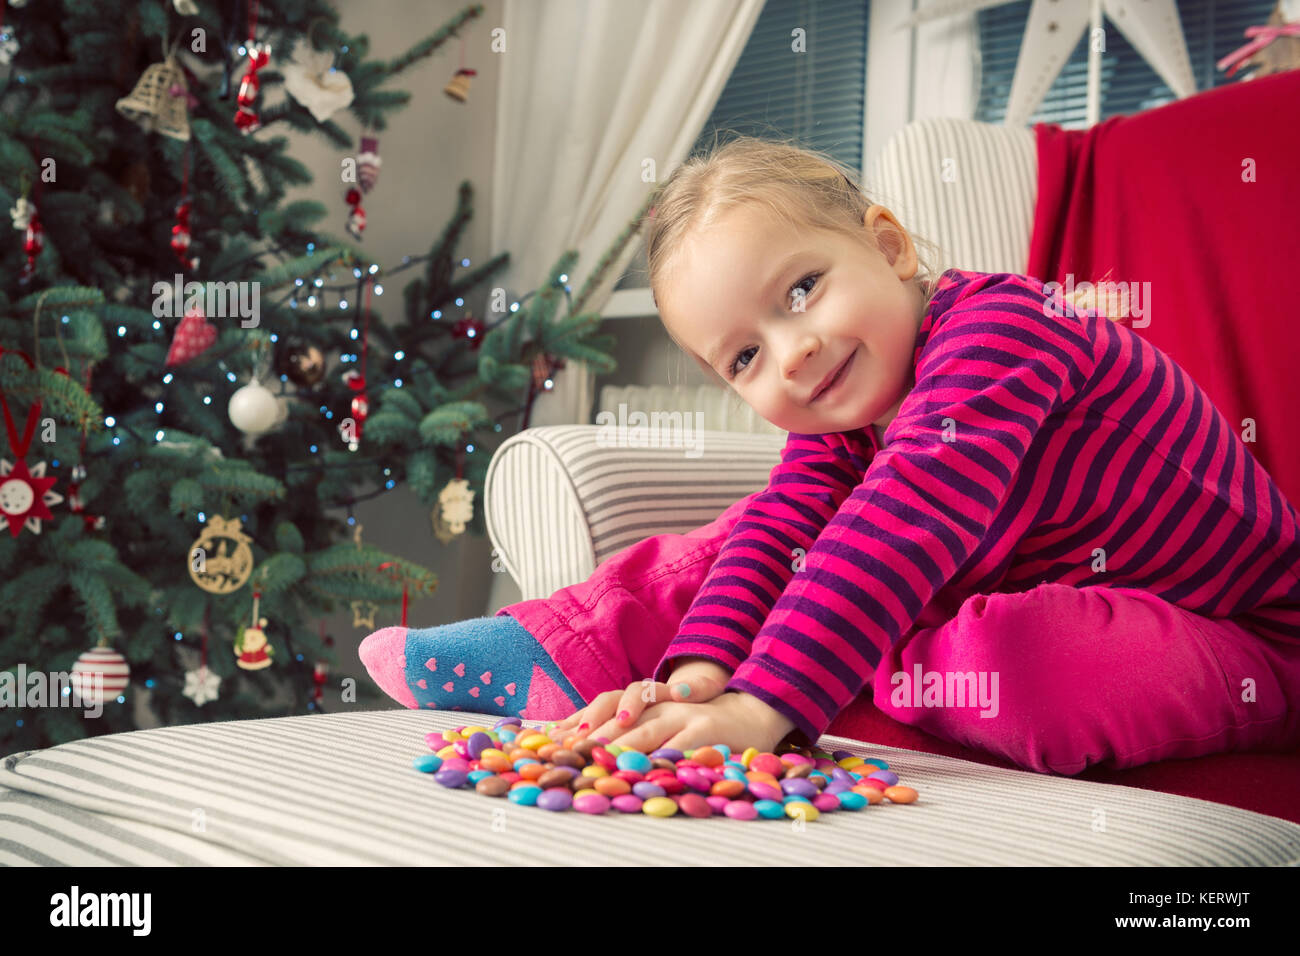 Adorable preschool girl playing with sweets on xmas eve Stock Photo